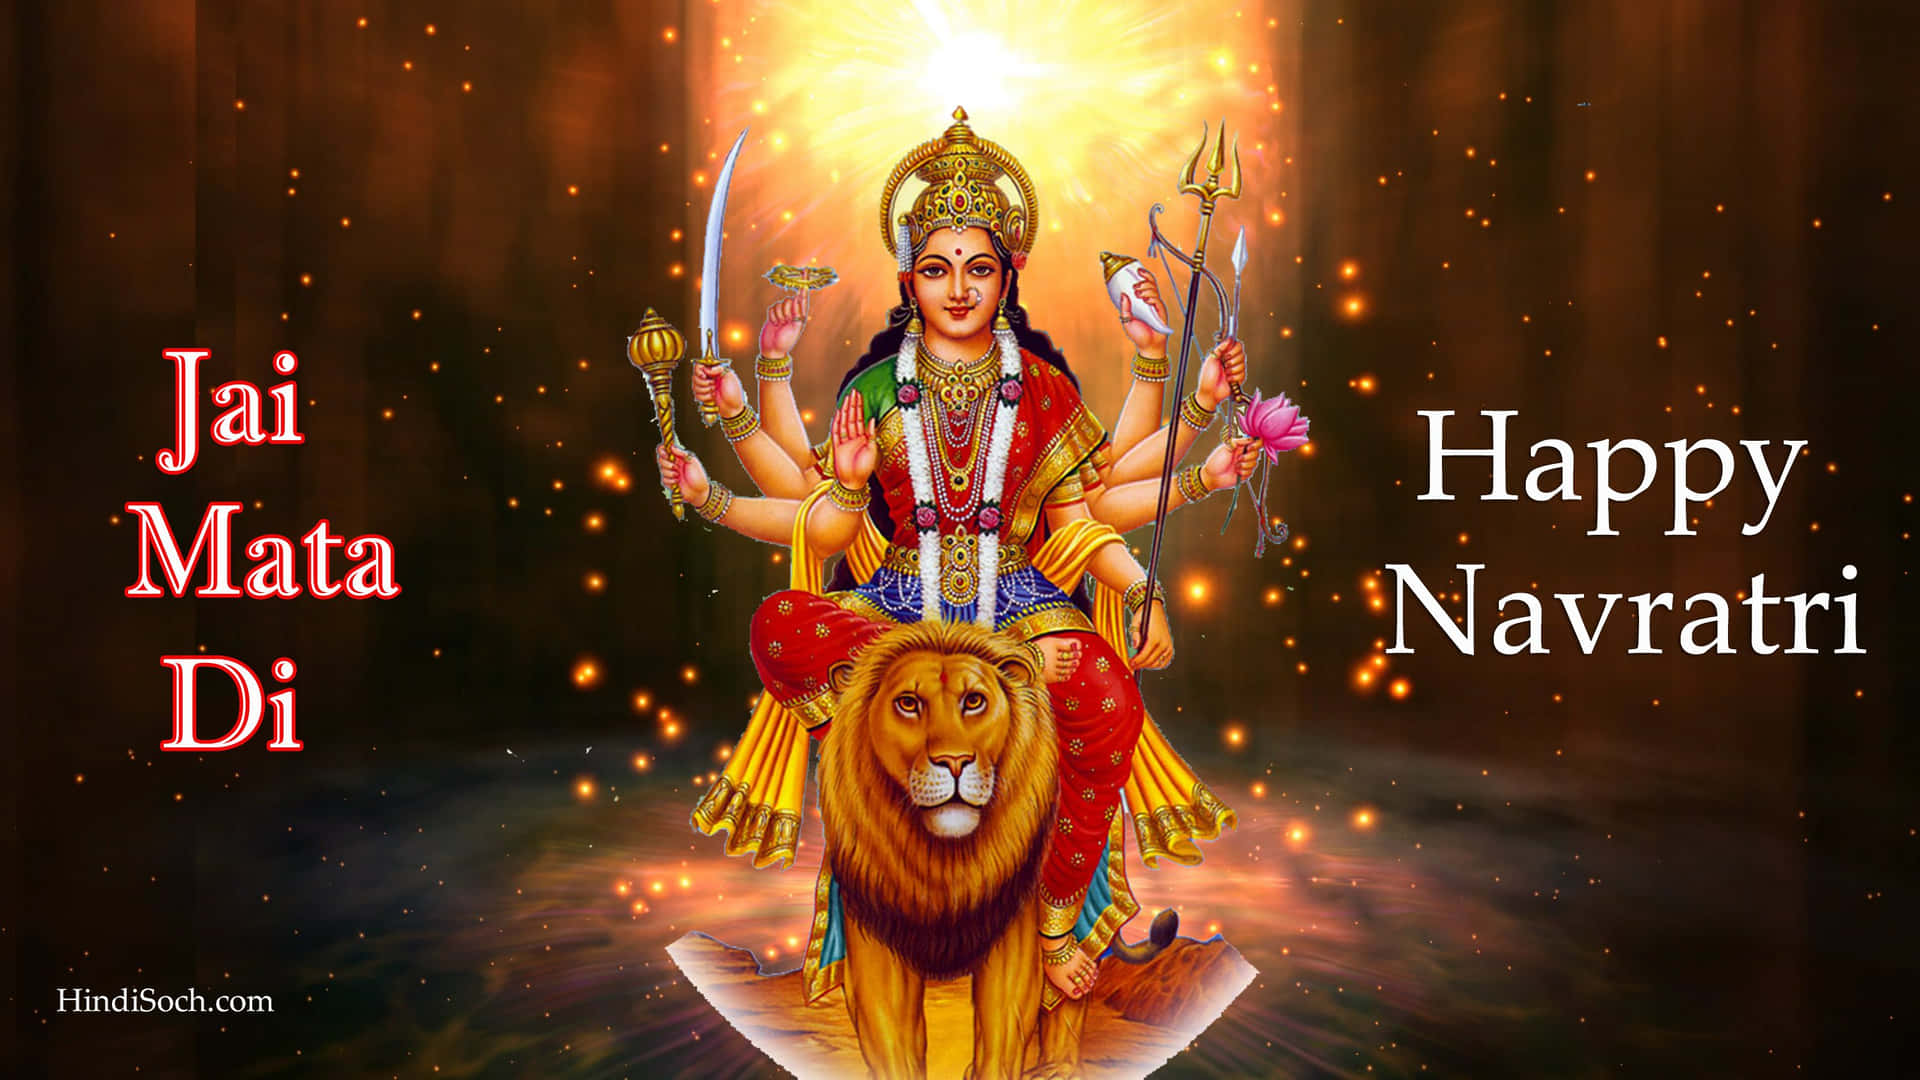 A Picture Of A Lion With The Words Jai Mata Di Navarati